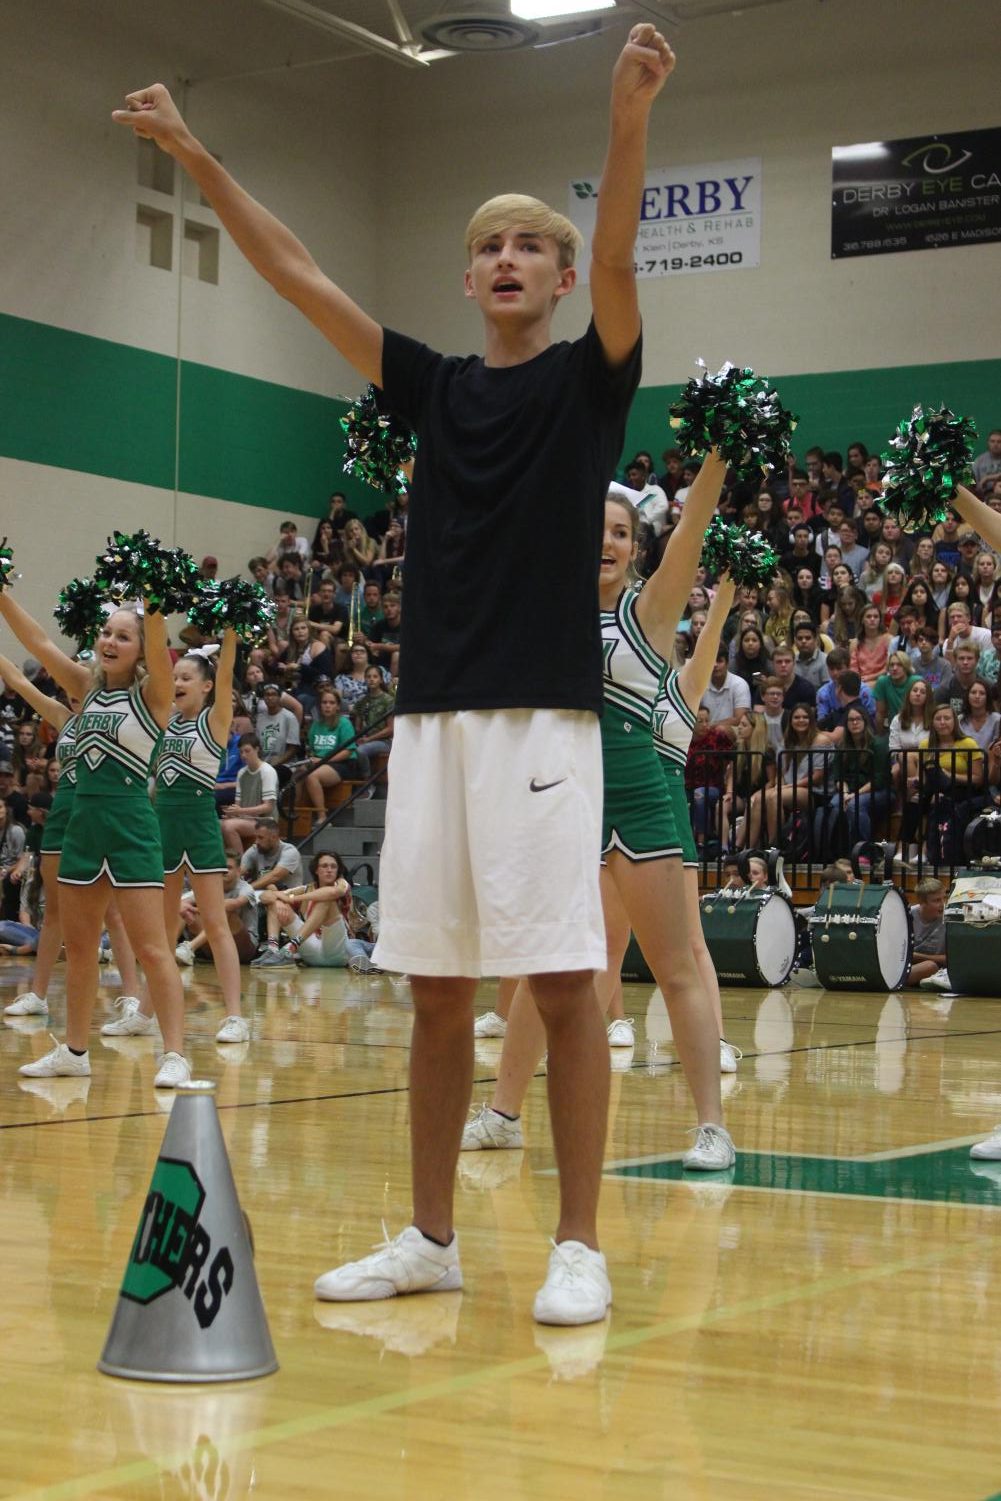 Freshman+pep+assembly+8%2F16%2F18+%28Photos+by+Reagan+Cowden%29